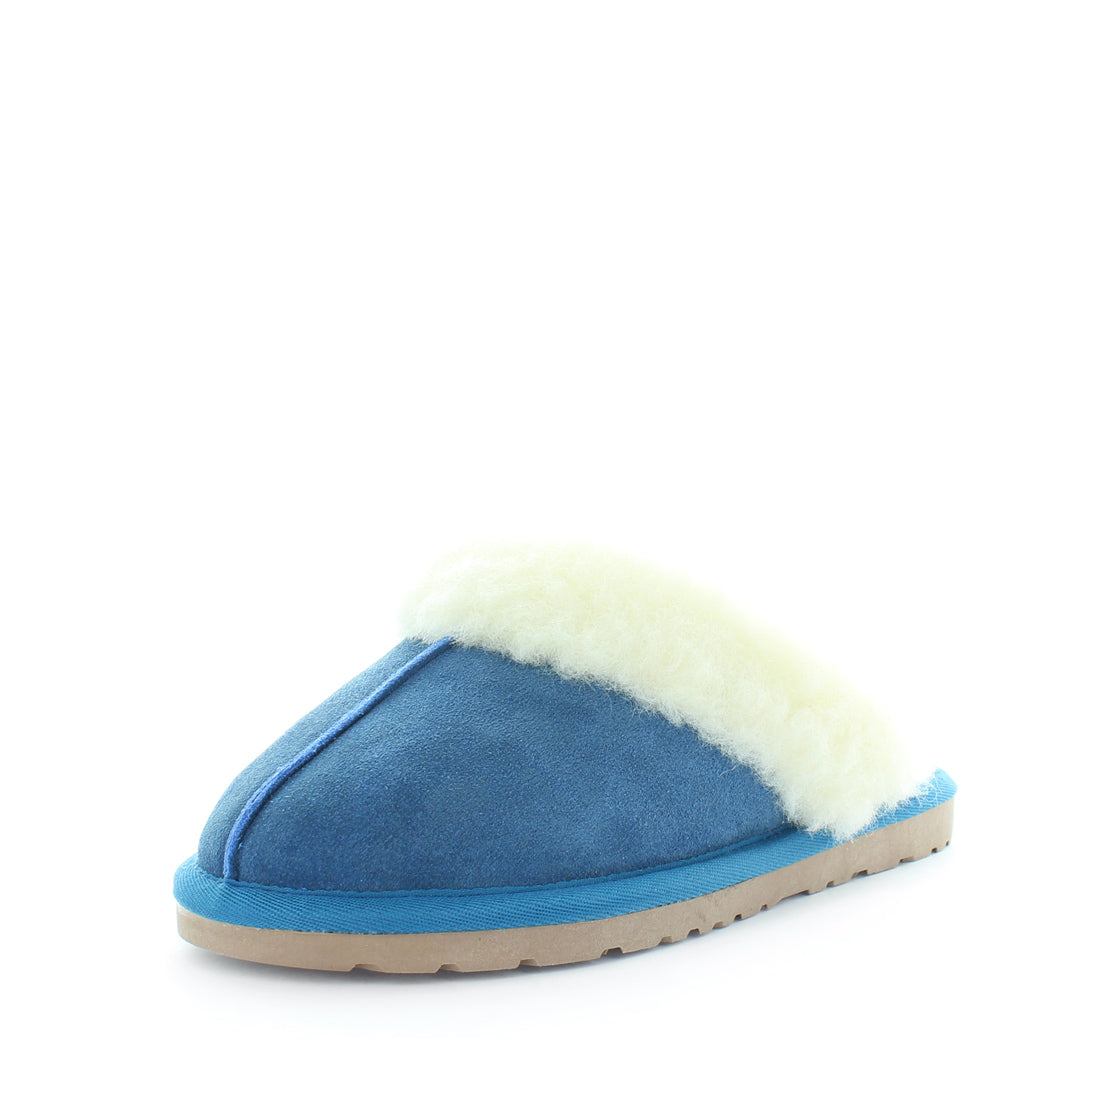 Just Bee UGGs- cita- womens little slip-on slipper style, 100% wool, leather shoe with detailed upper and over hanging wool on the trim - womens comfort slippers - womens best slippers- (4865771143247)